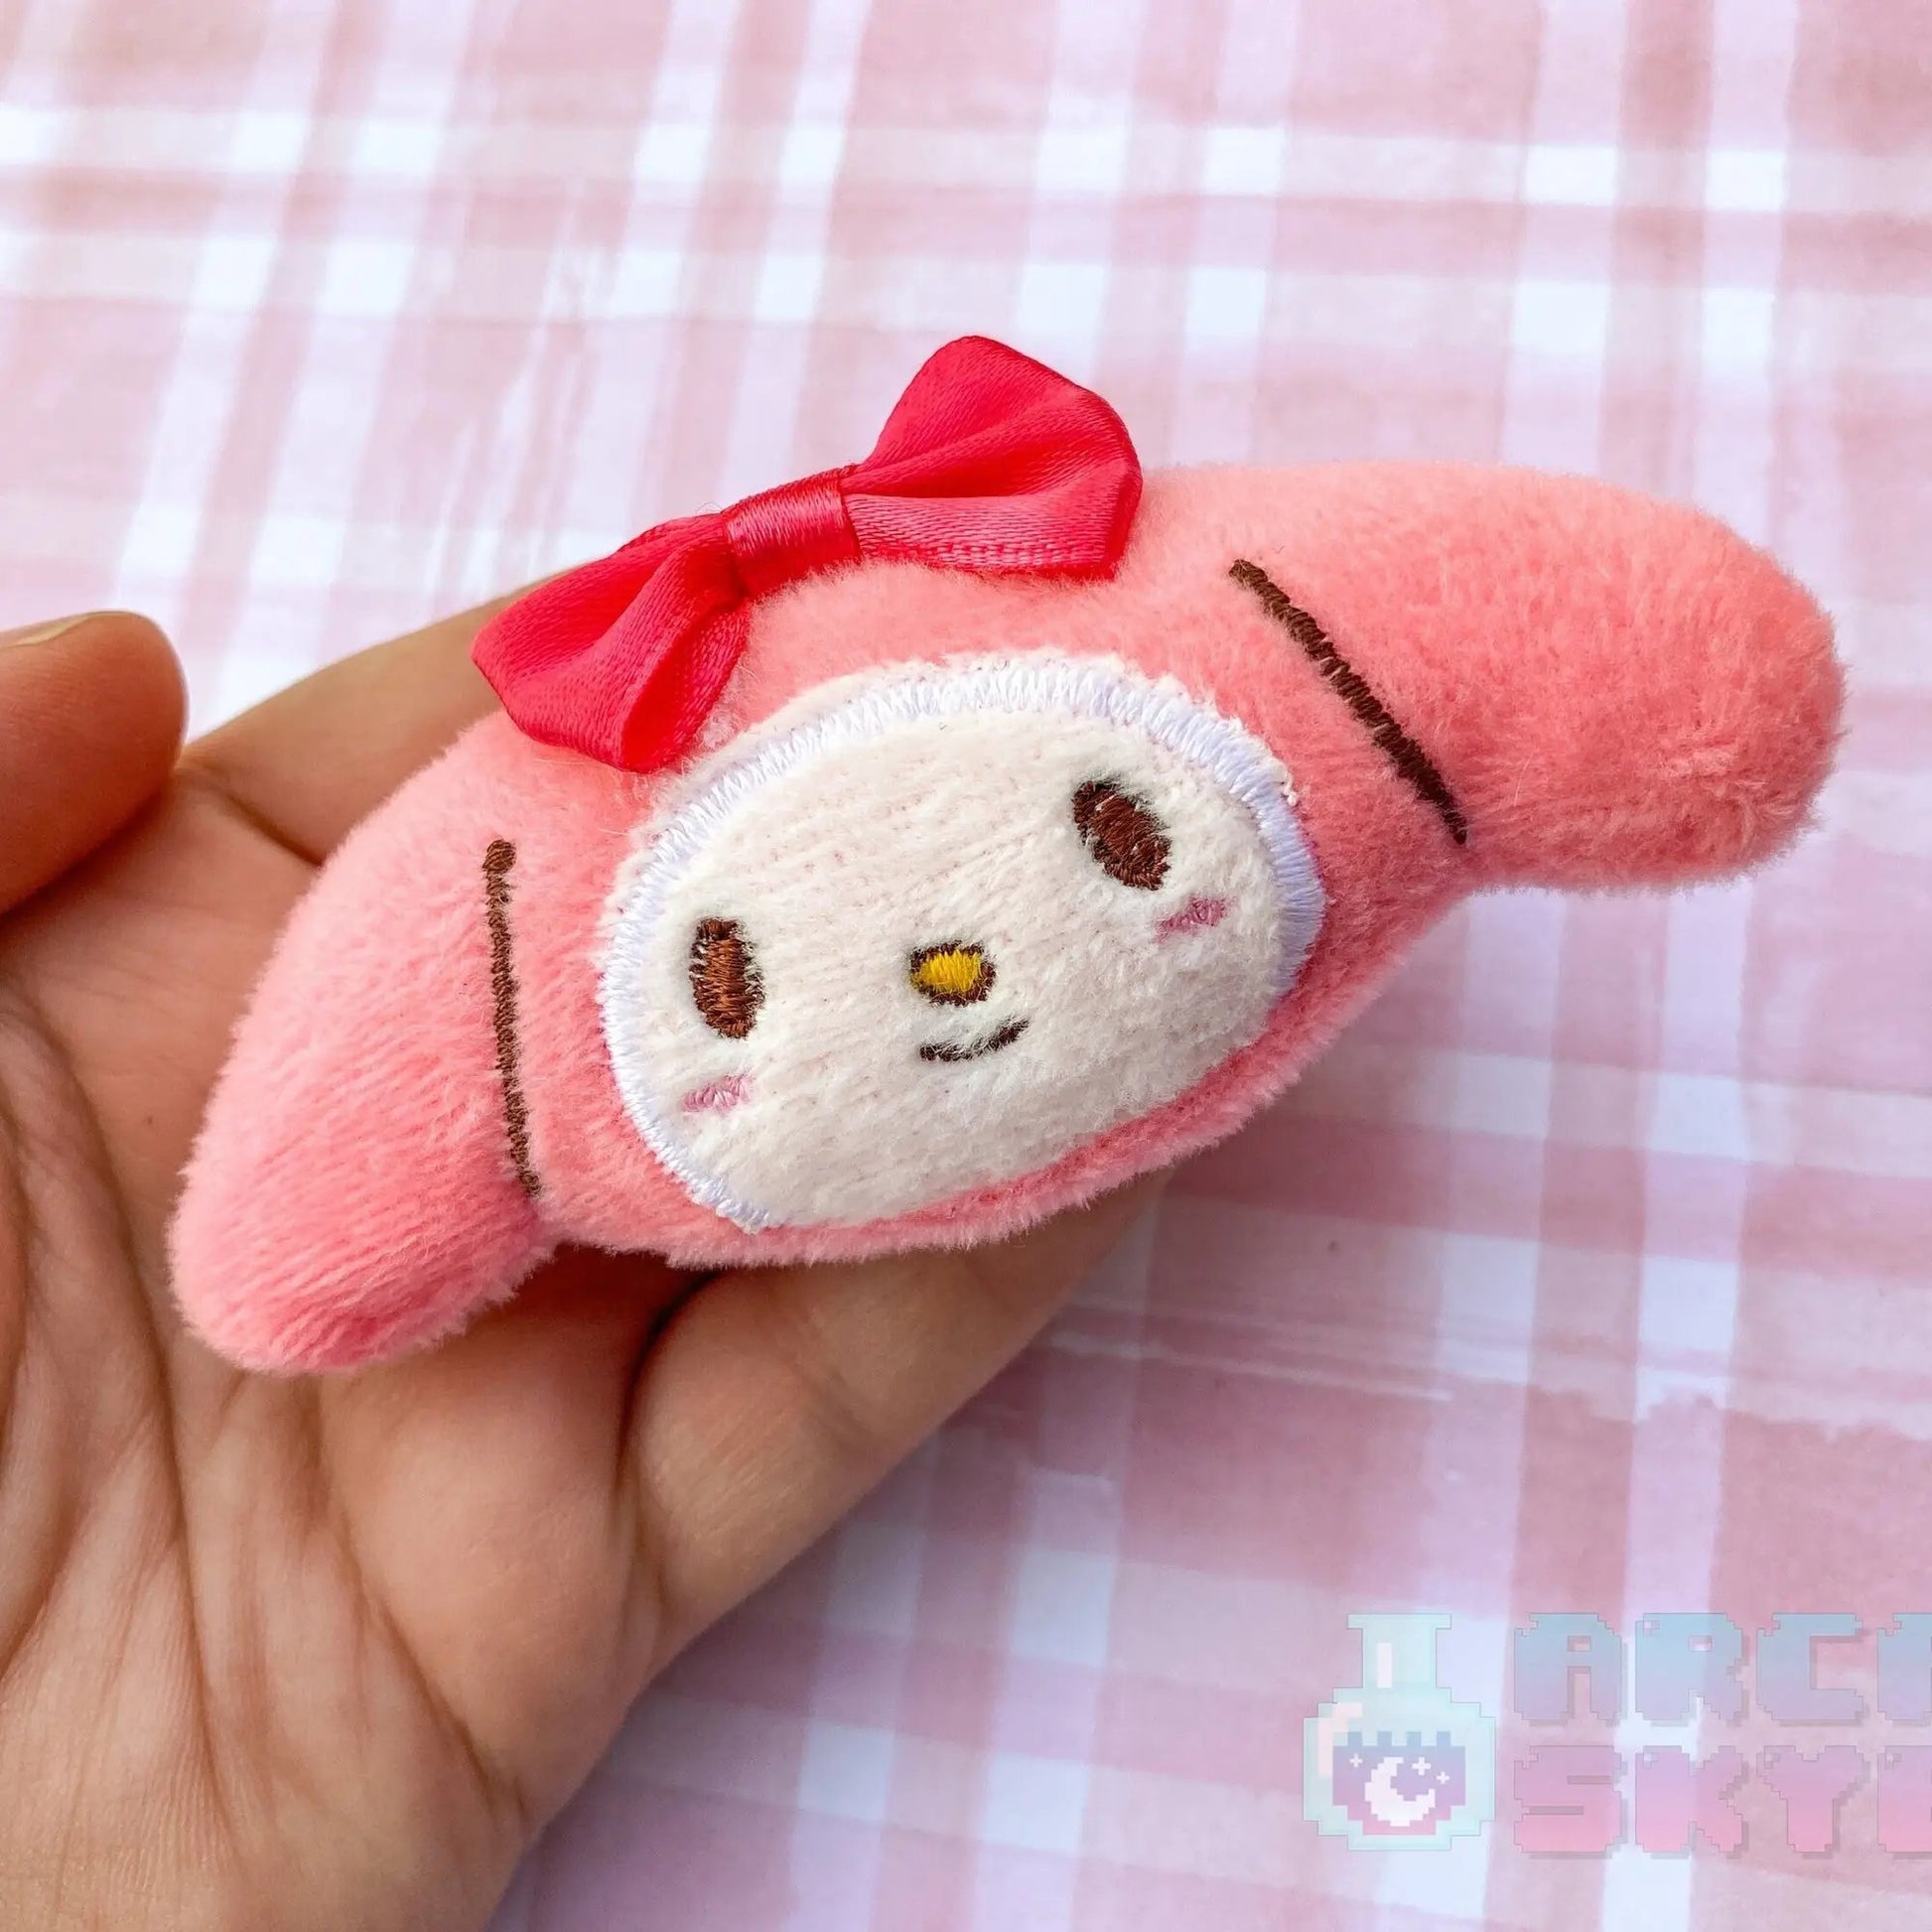 a hand holding a pink stuffed animal with a red bow